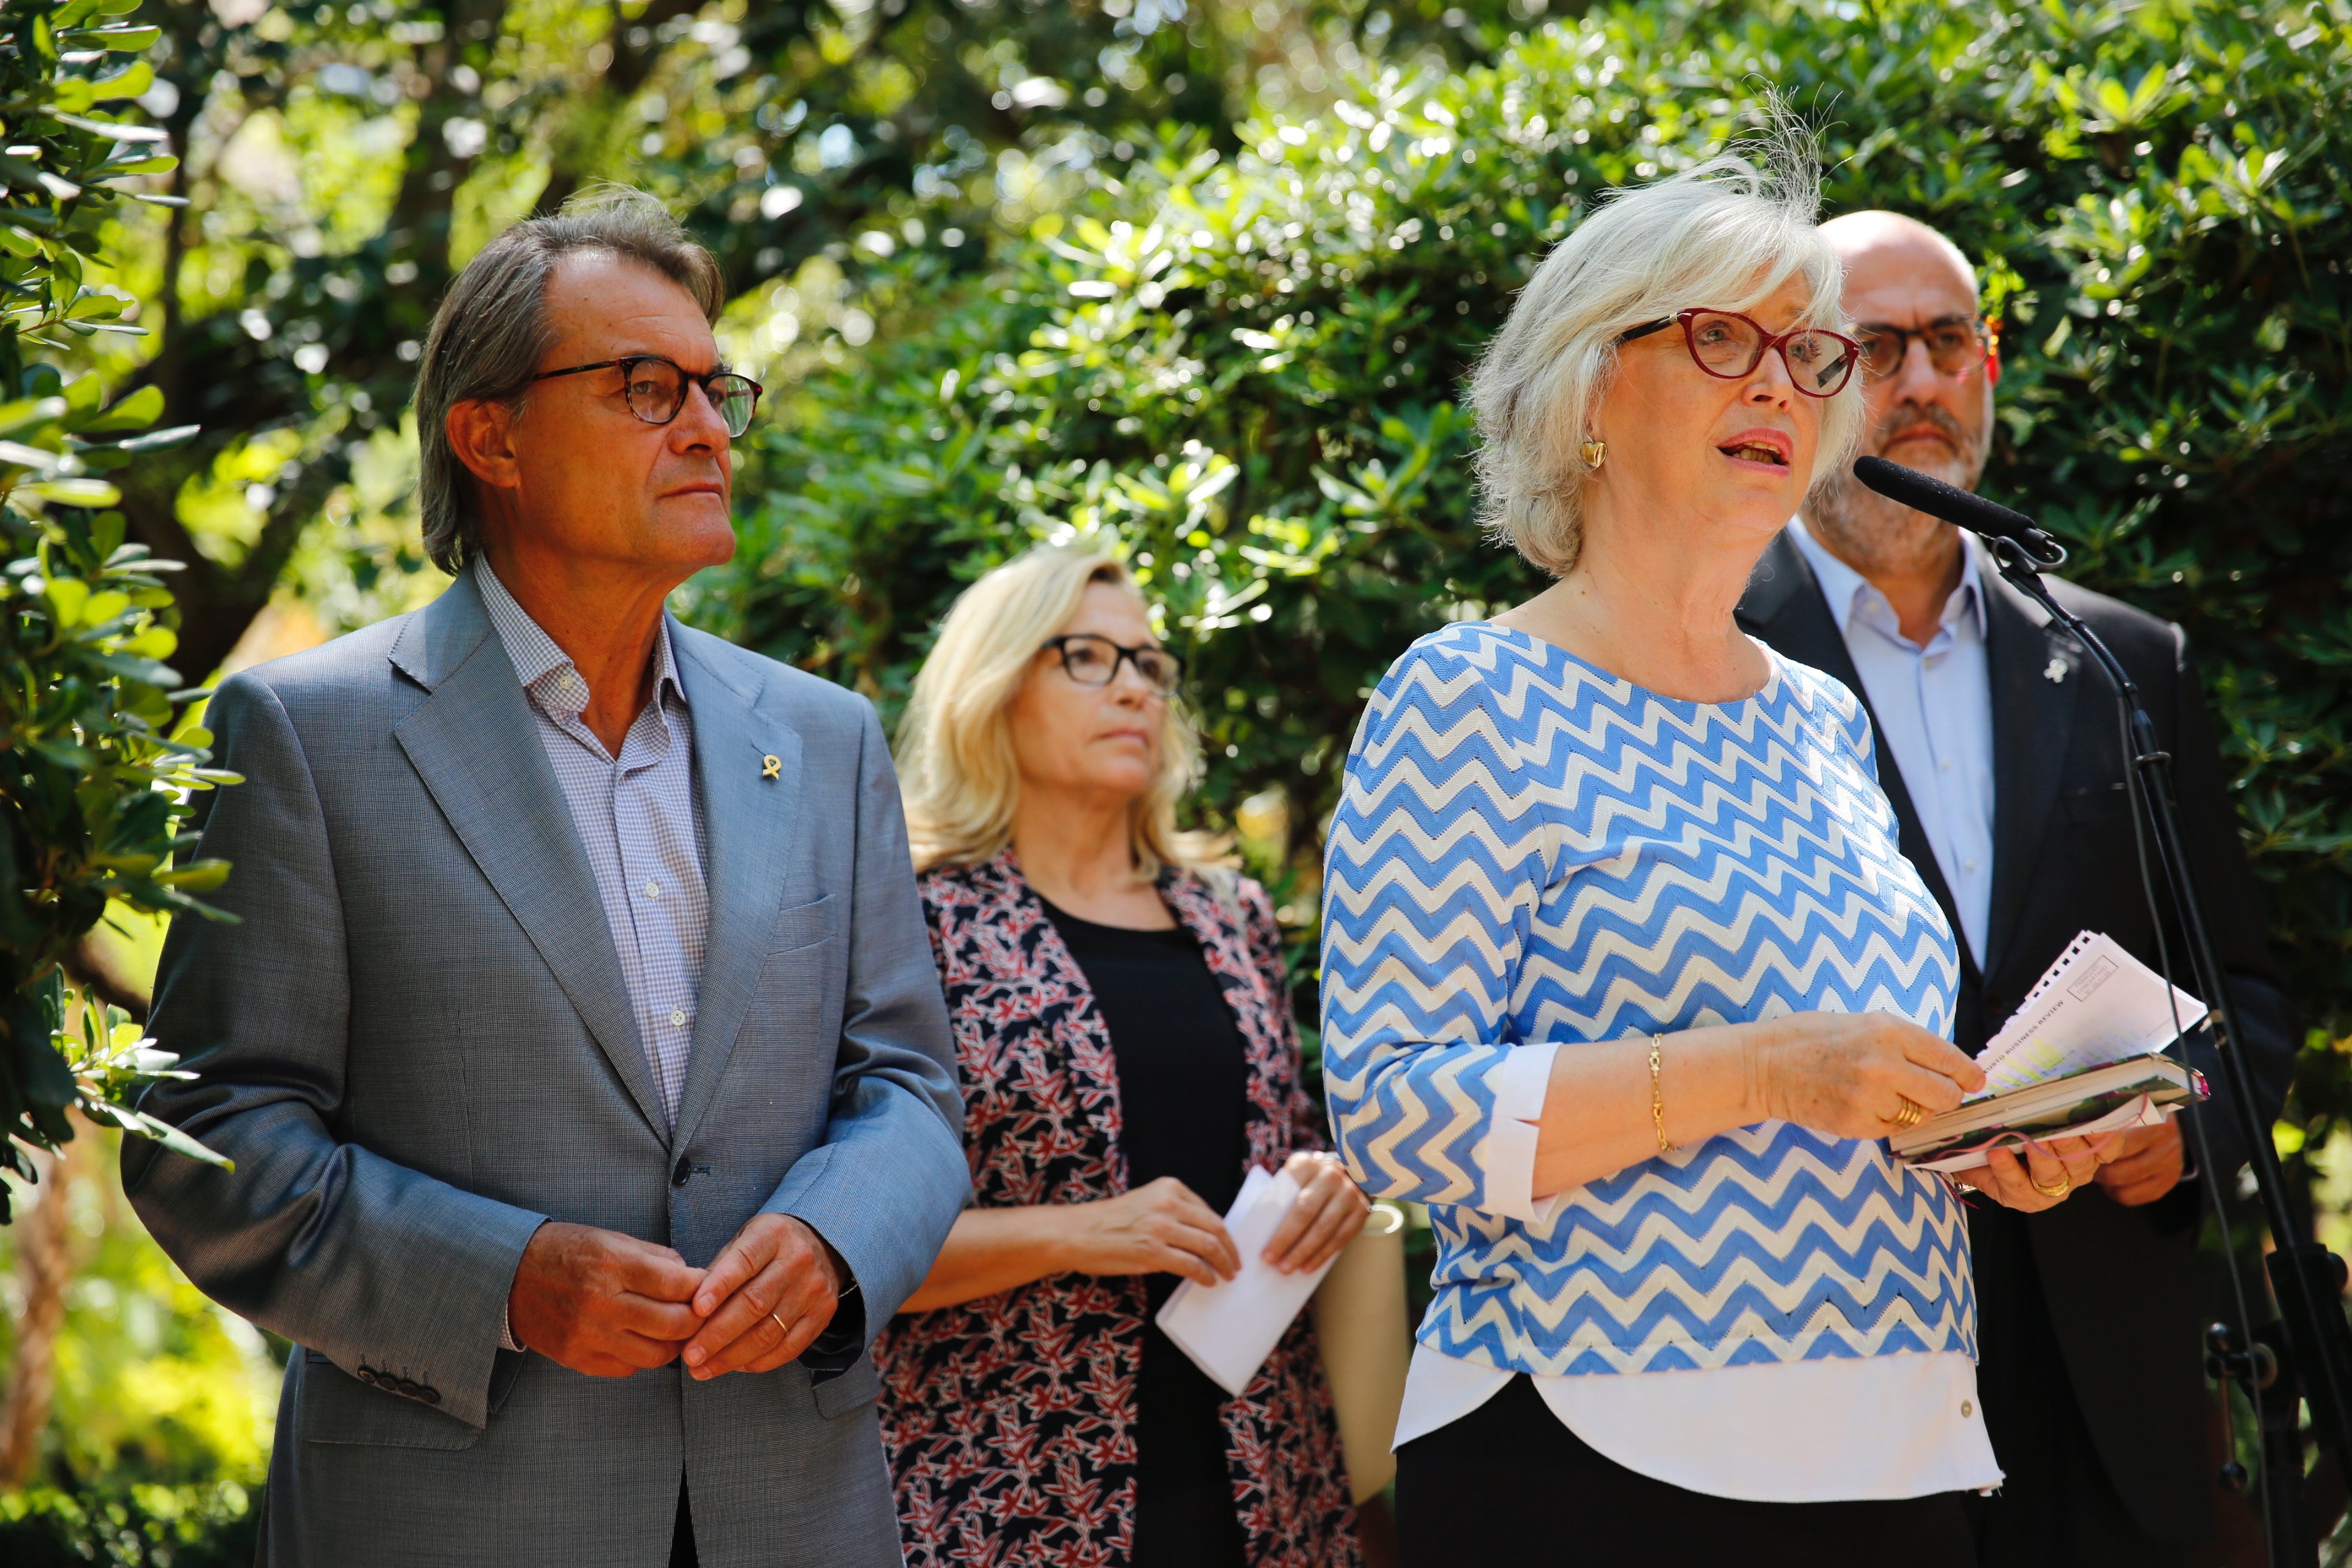 2014 Catalan minister Irene Rigau: "The state is out to get us and our families"